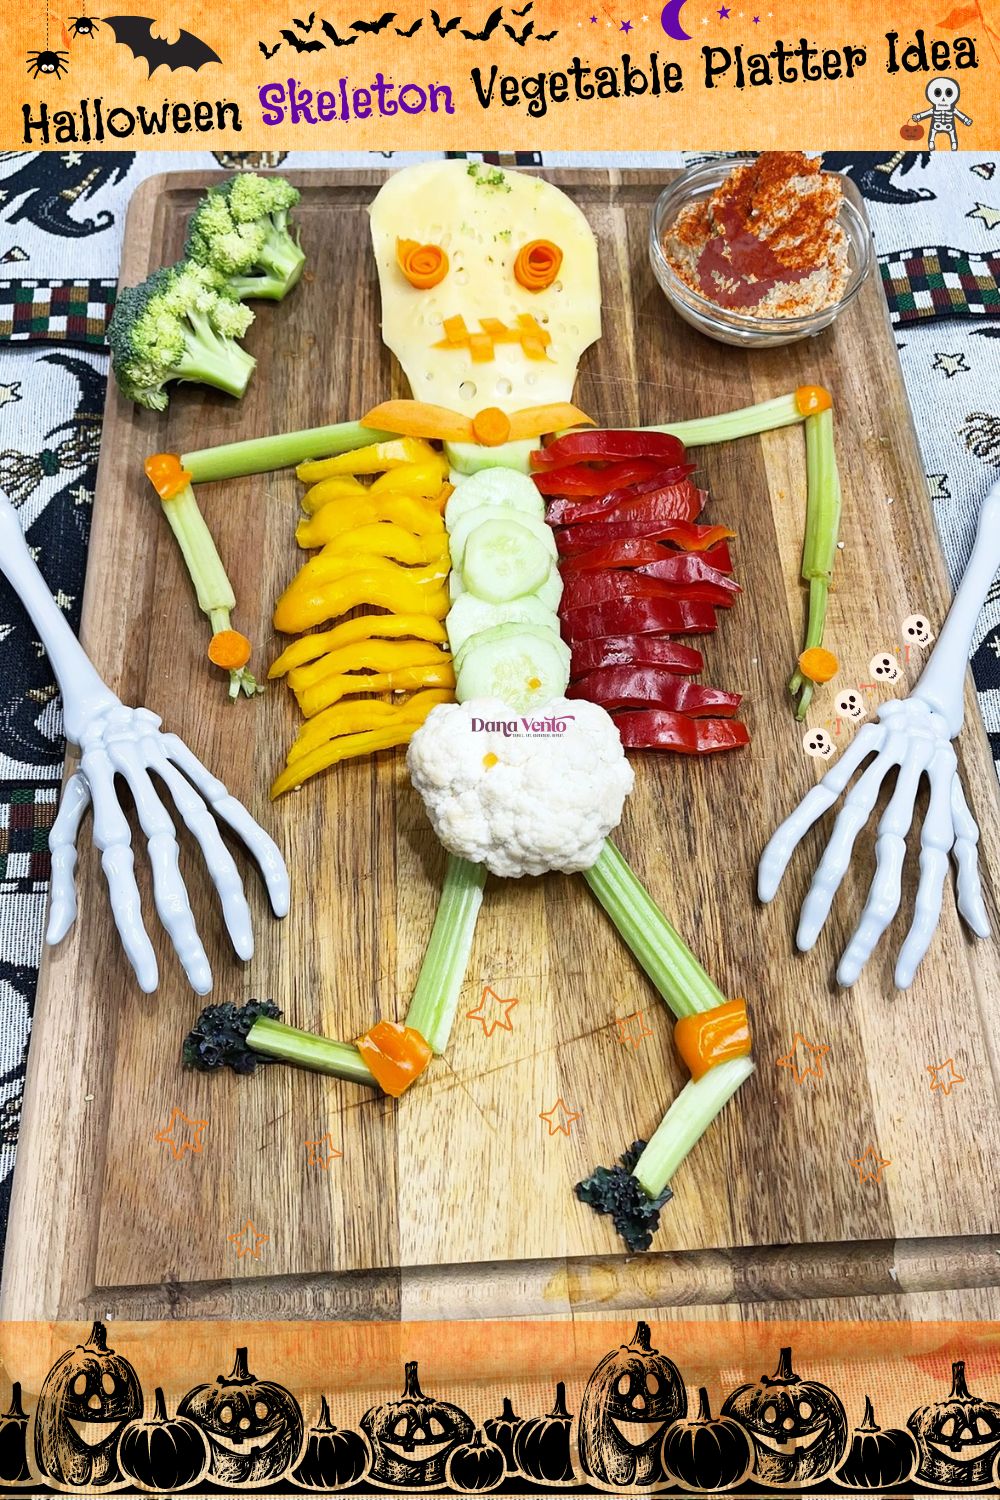 Halloween Skeleton Vegetable Platter Idea that gets placed atop a wooden cutting board